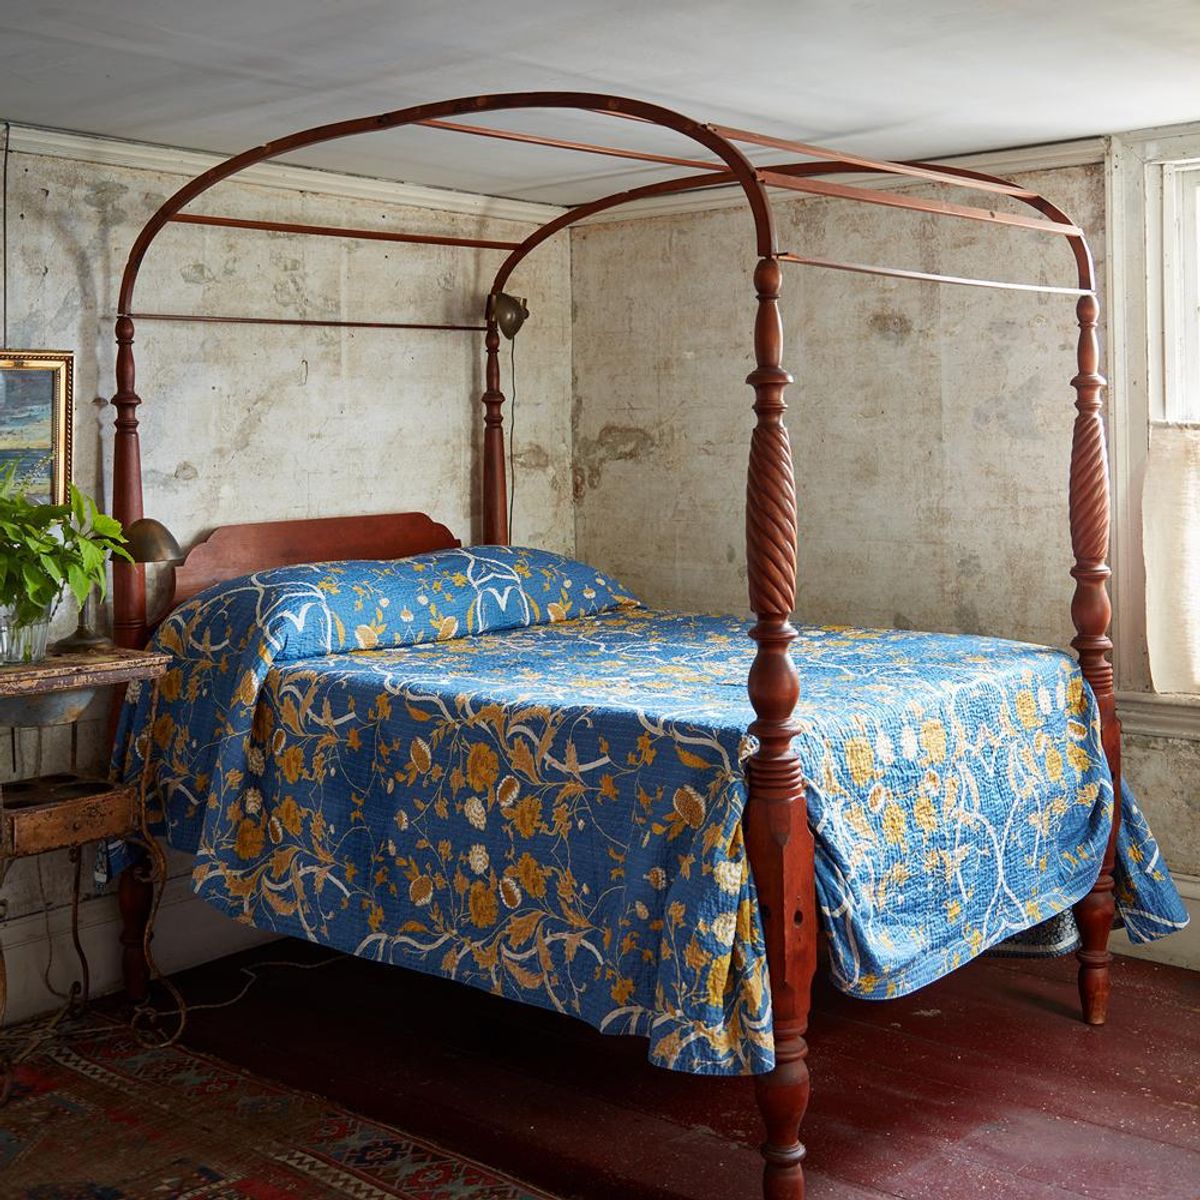 x Jeanette Farrier “Canopy” Printed King Bedcover